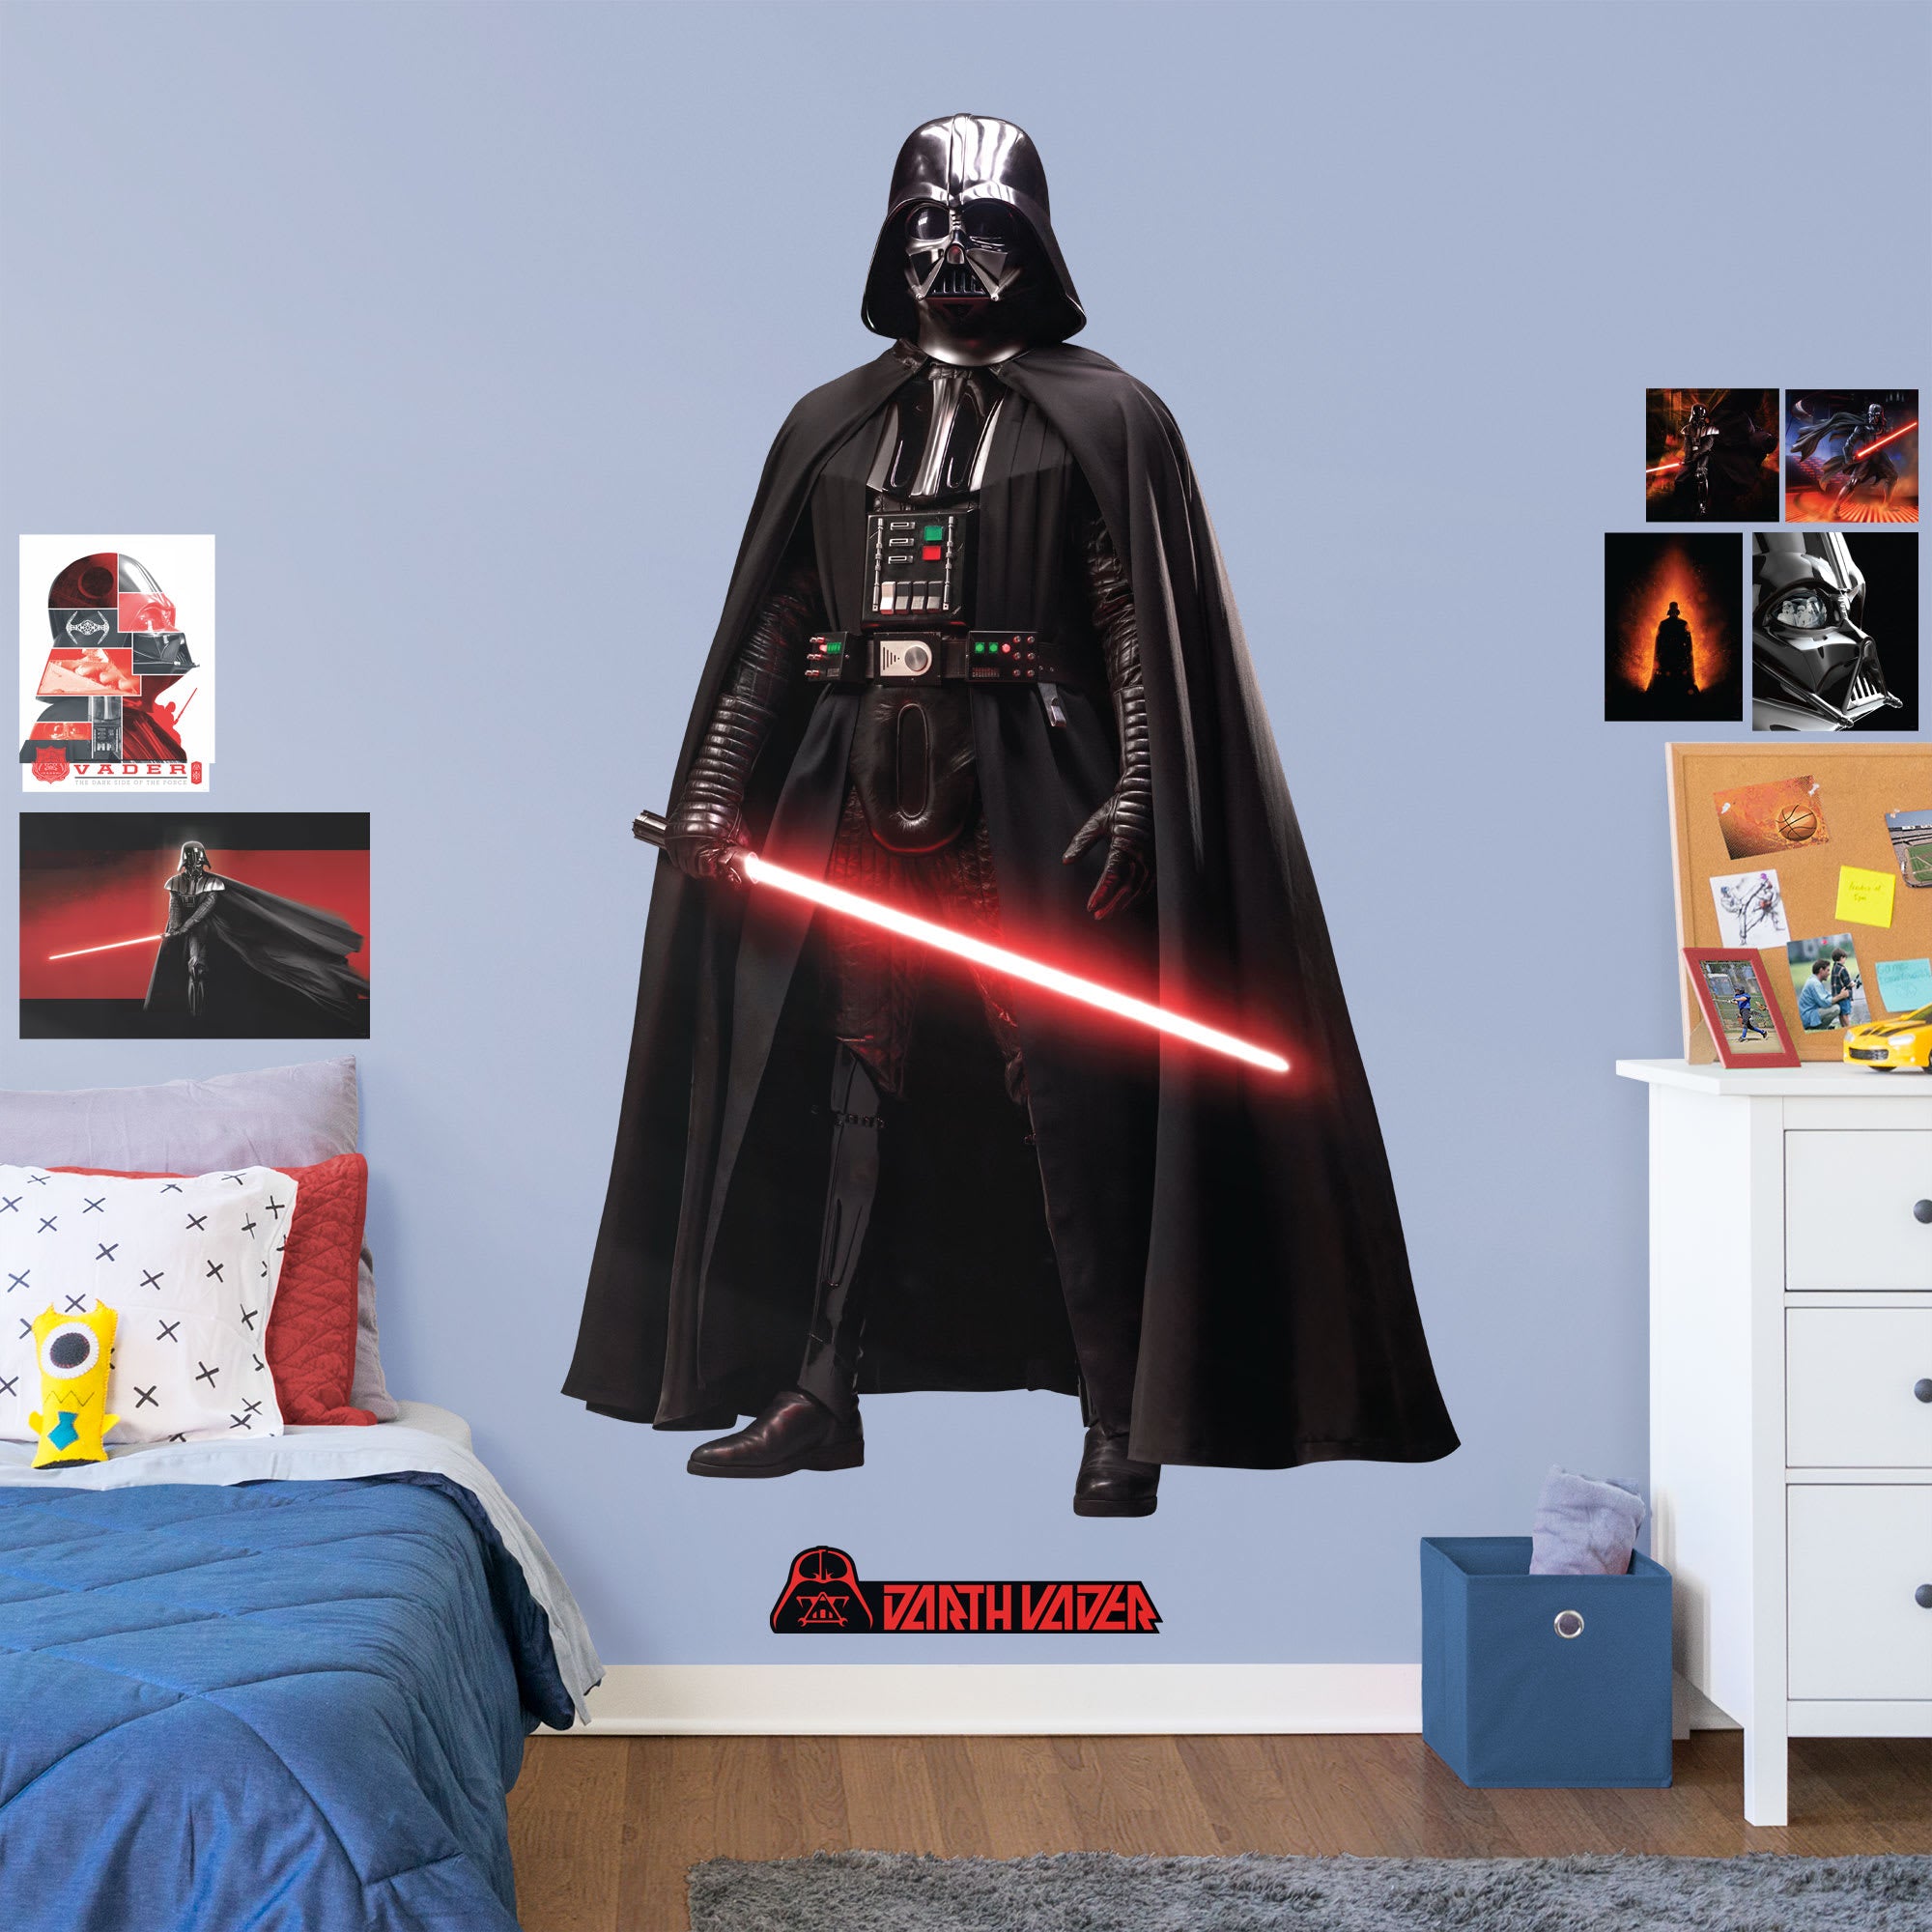 Darth Vader: Dark Lord of the Sith - Officially Licensed Removable Wall Decal Life-Size Character + 8 Decals (50"W x 78"H) by Fa